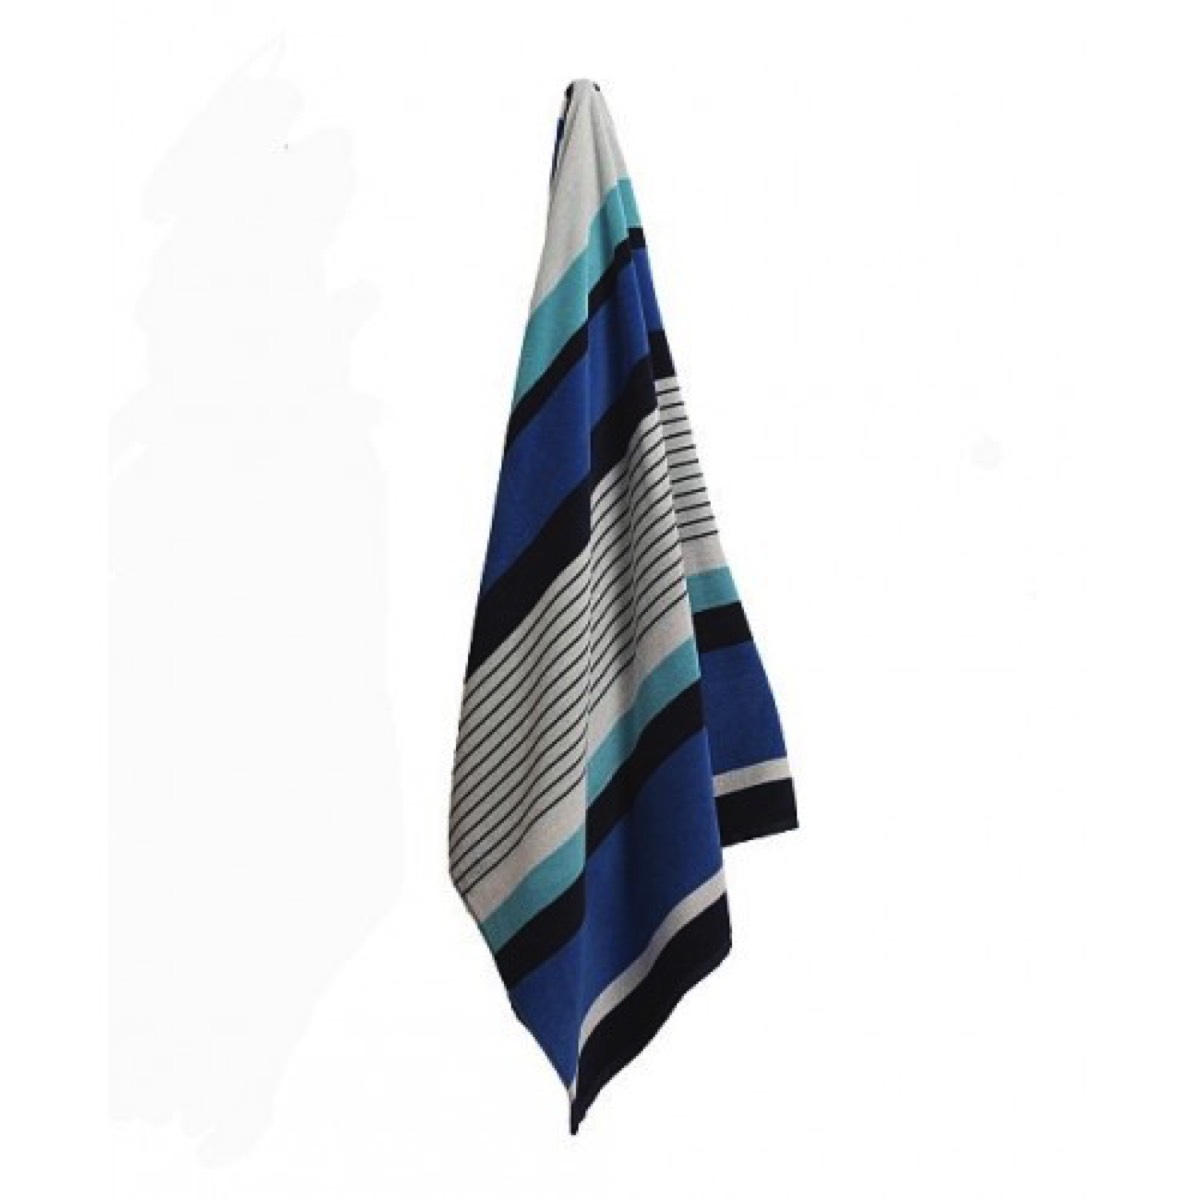 Hanging Bright Stripe Beach Towels from Blue Swimmer Towels